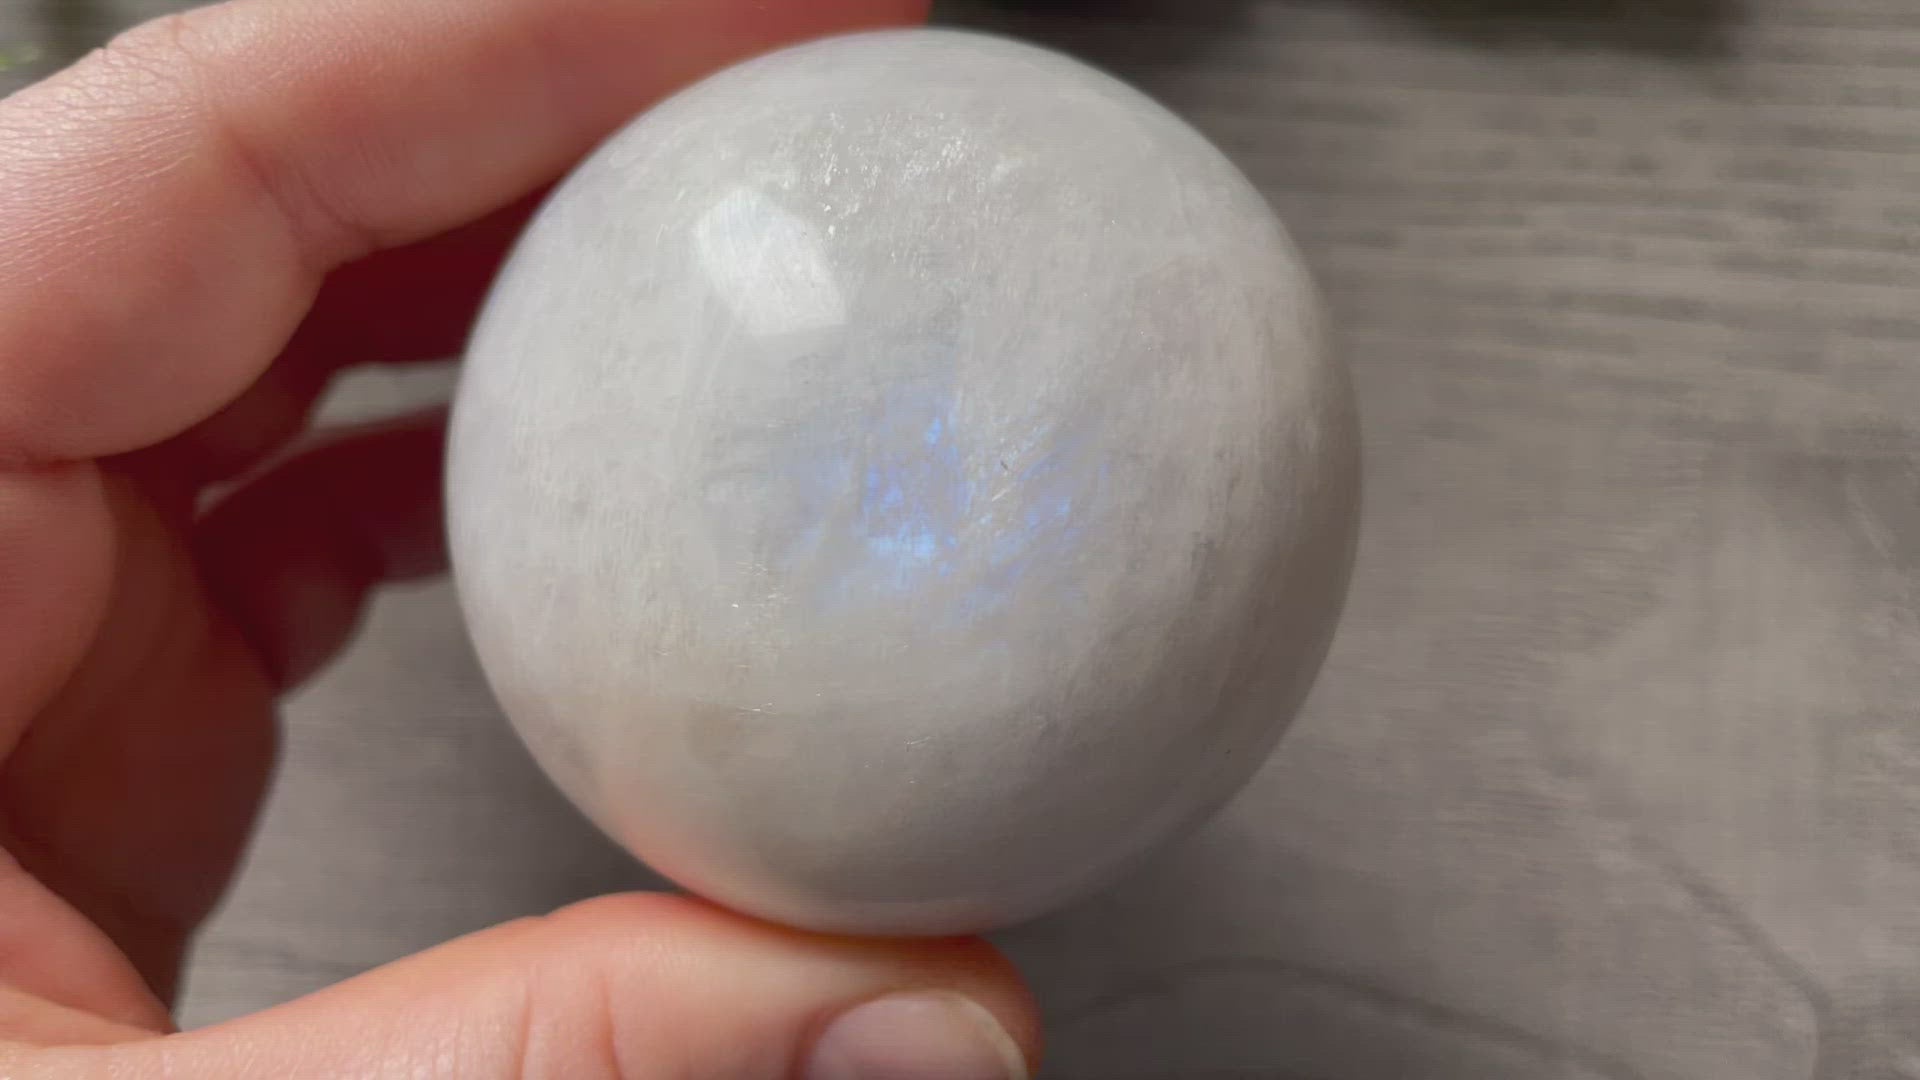 Pictured is a sphere carved out of white moonstone.